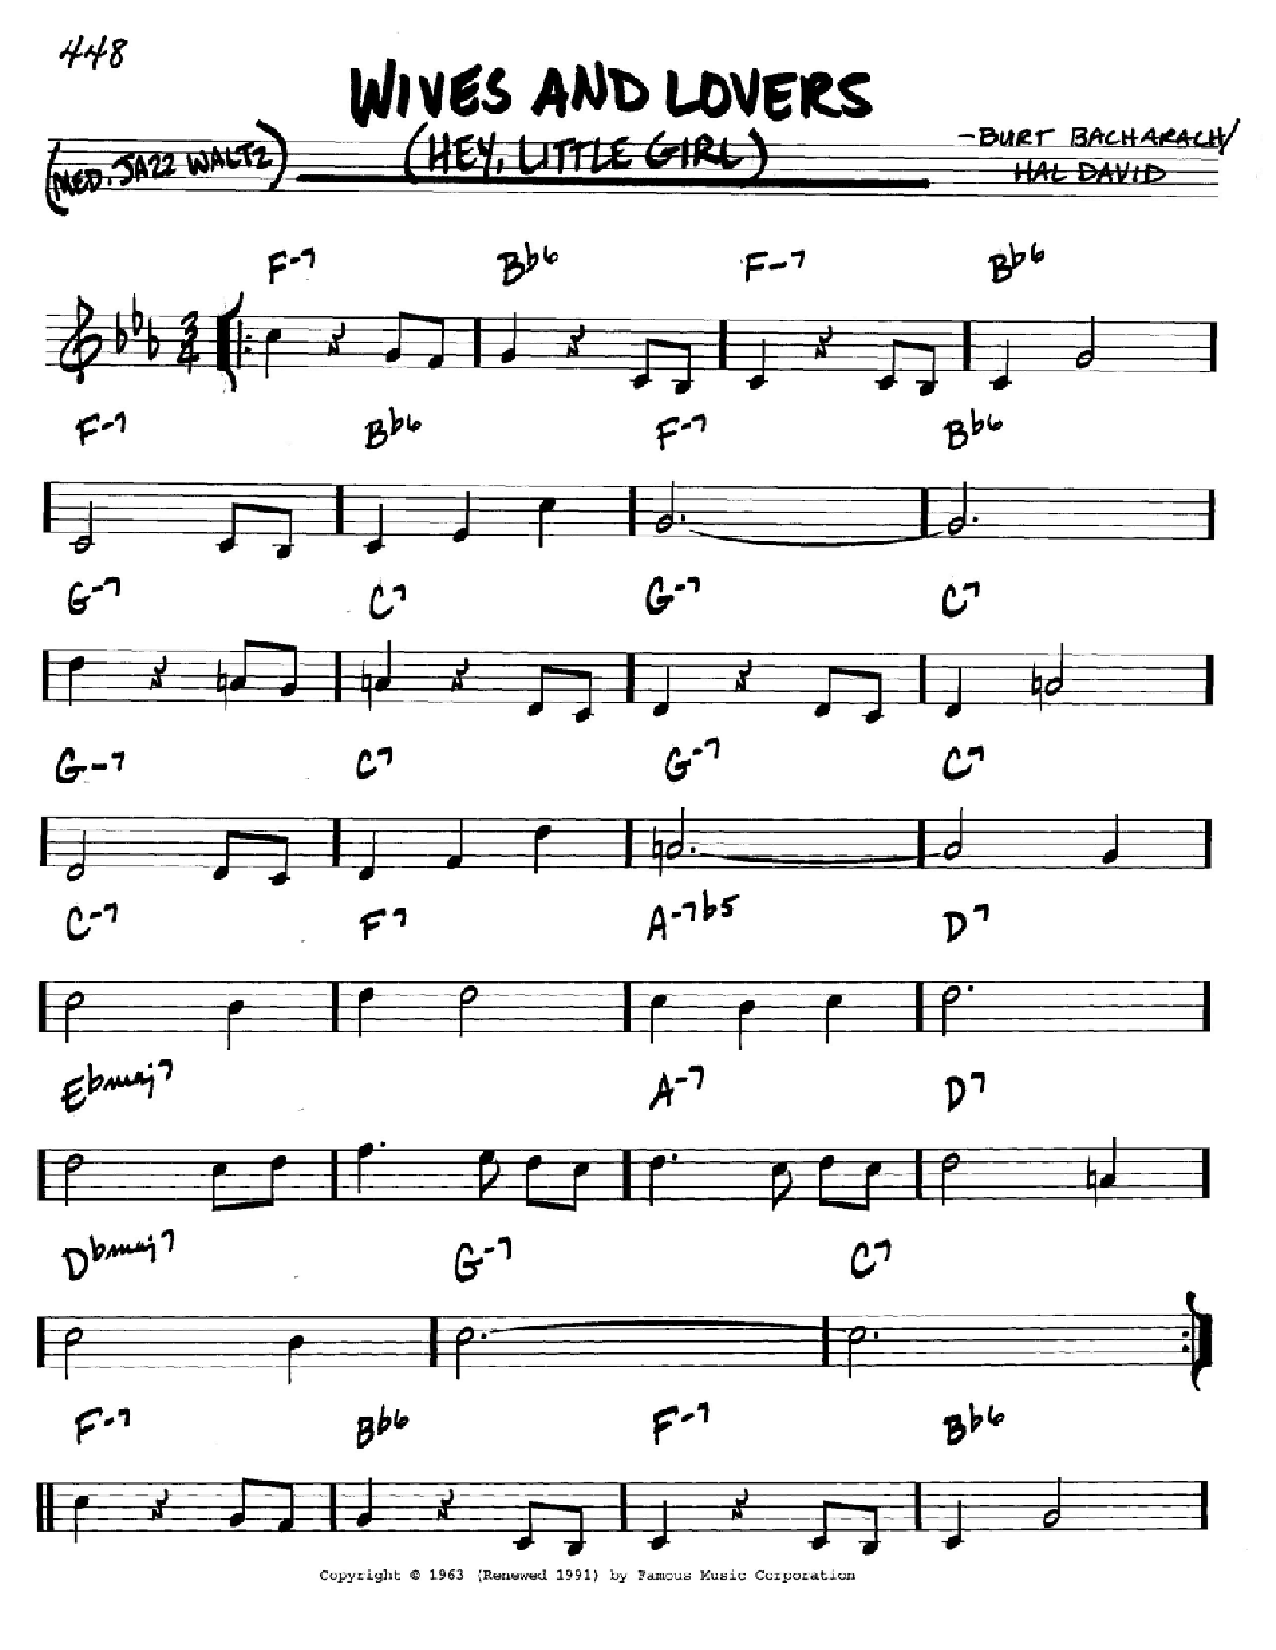 Download Bacharach & David Wives And Lovers (Hey, Little Girl) Sheet Music